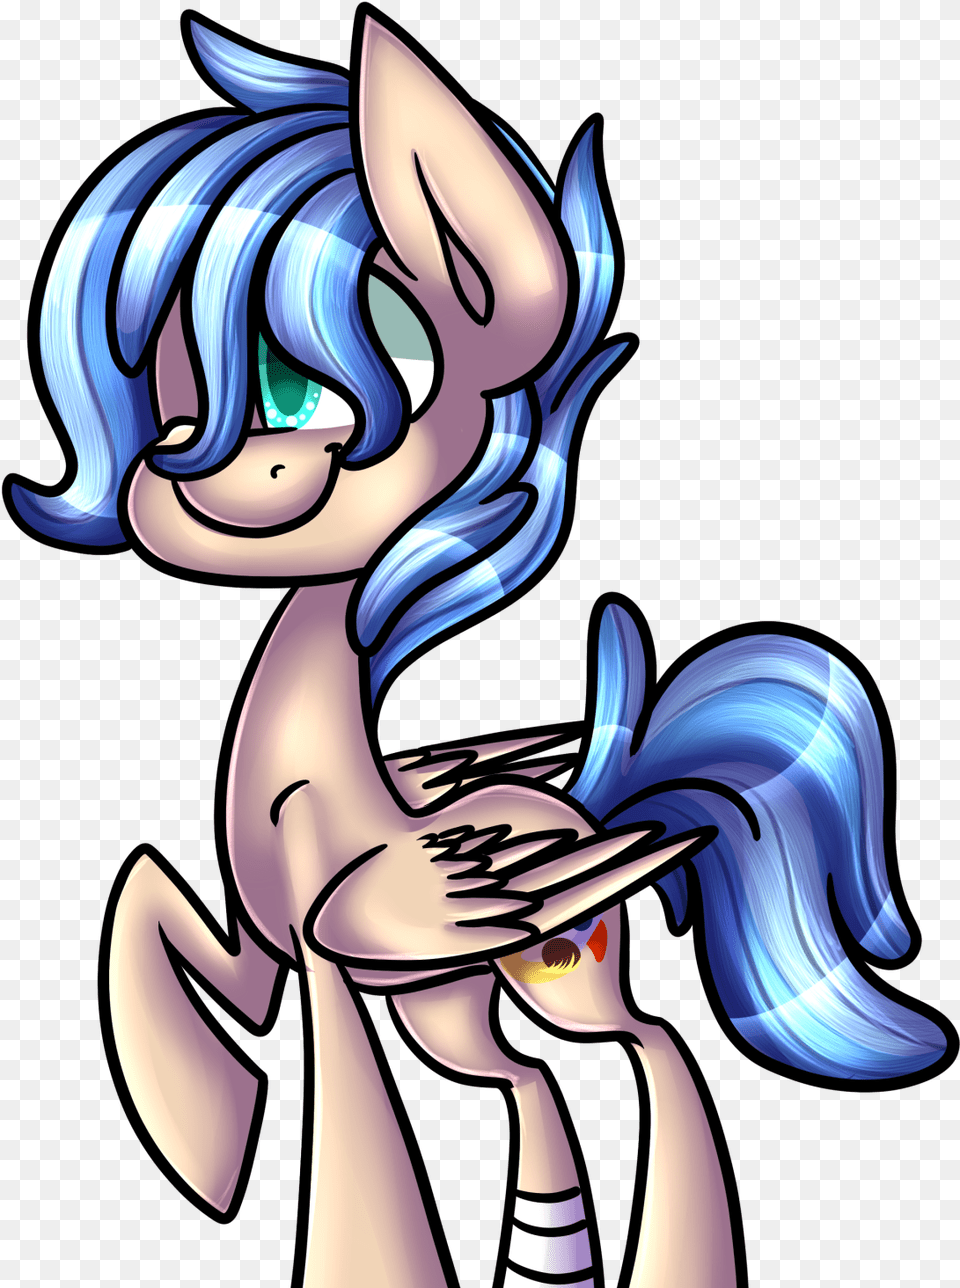 Couch Crusader Equestria Daily, Book, Comics, Publication, Art Free Png Download